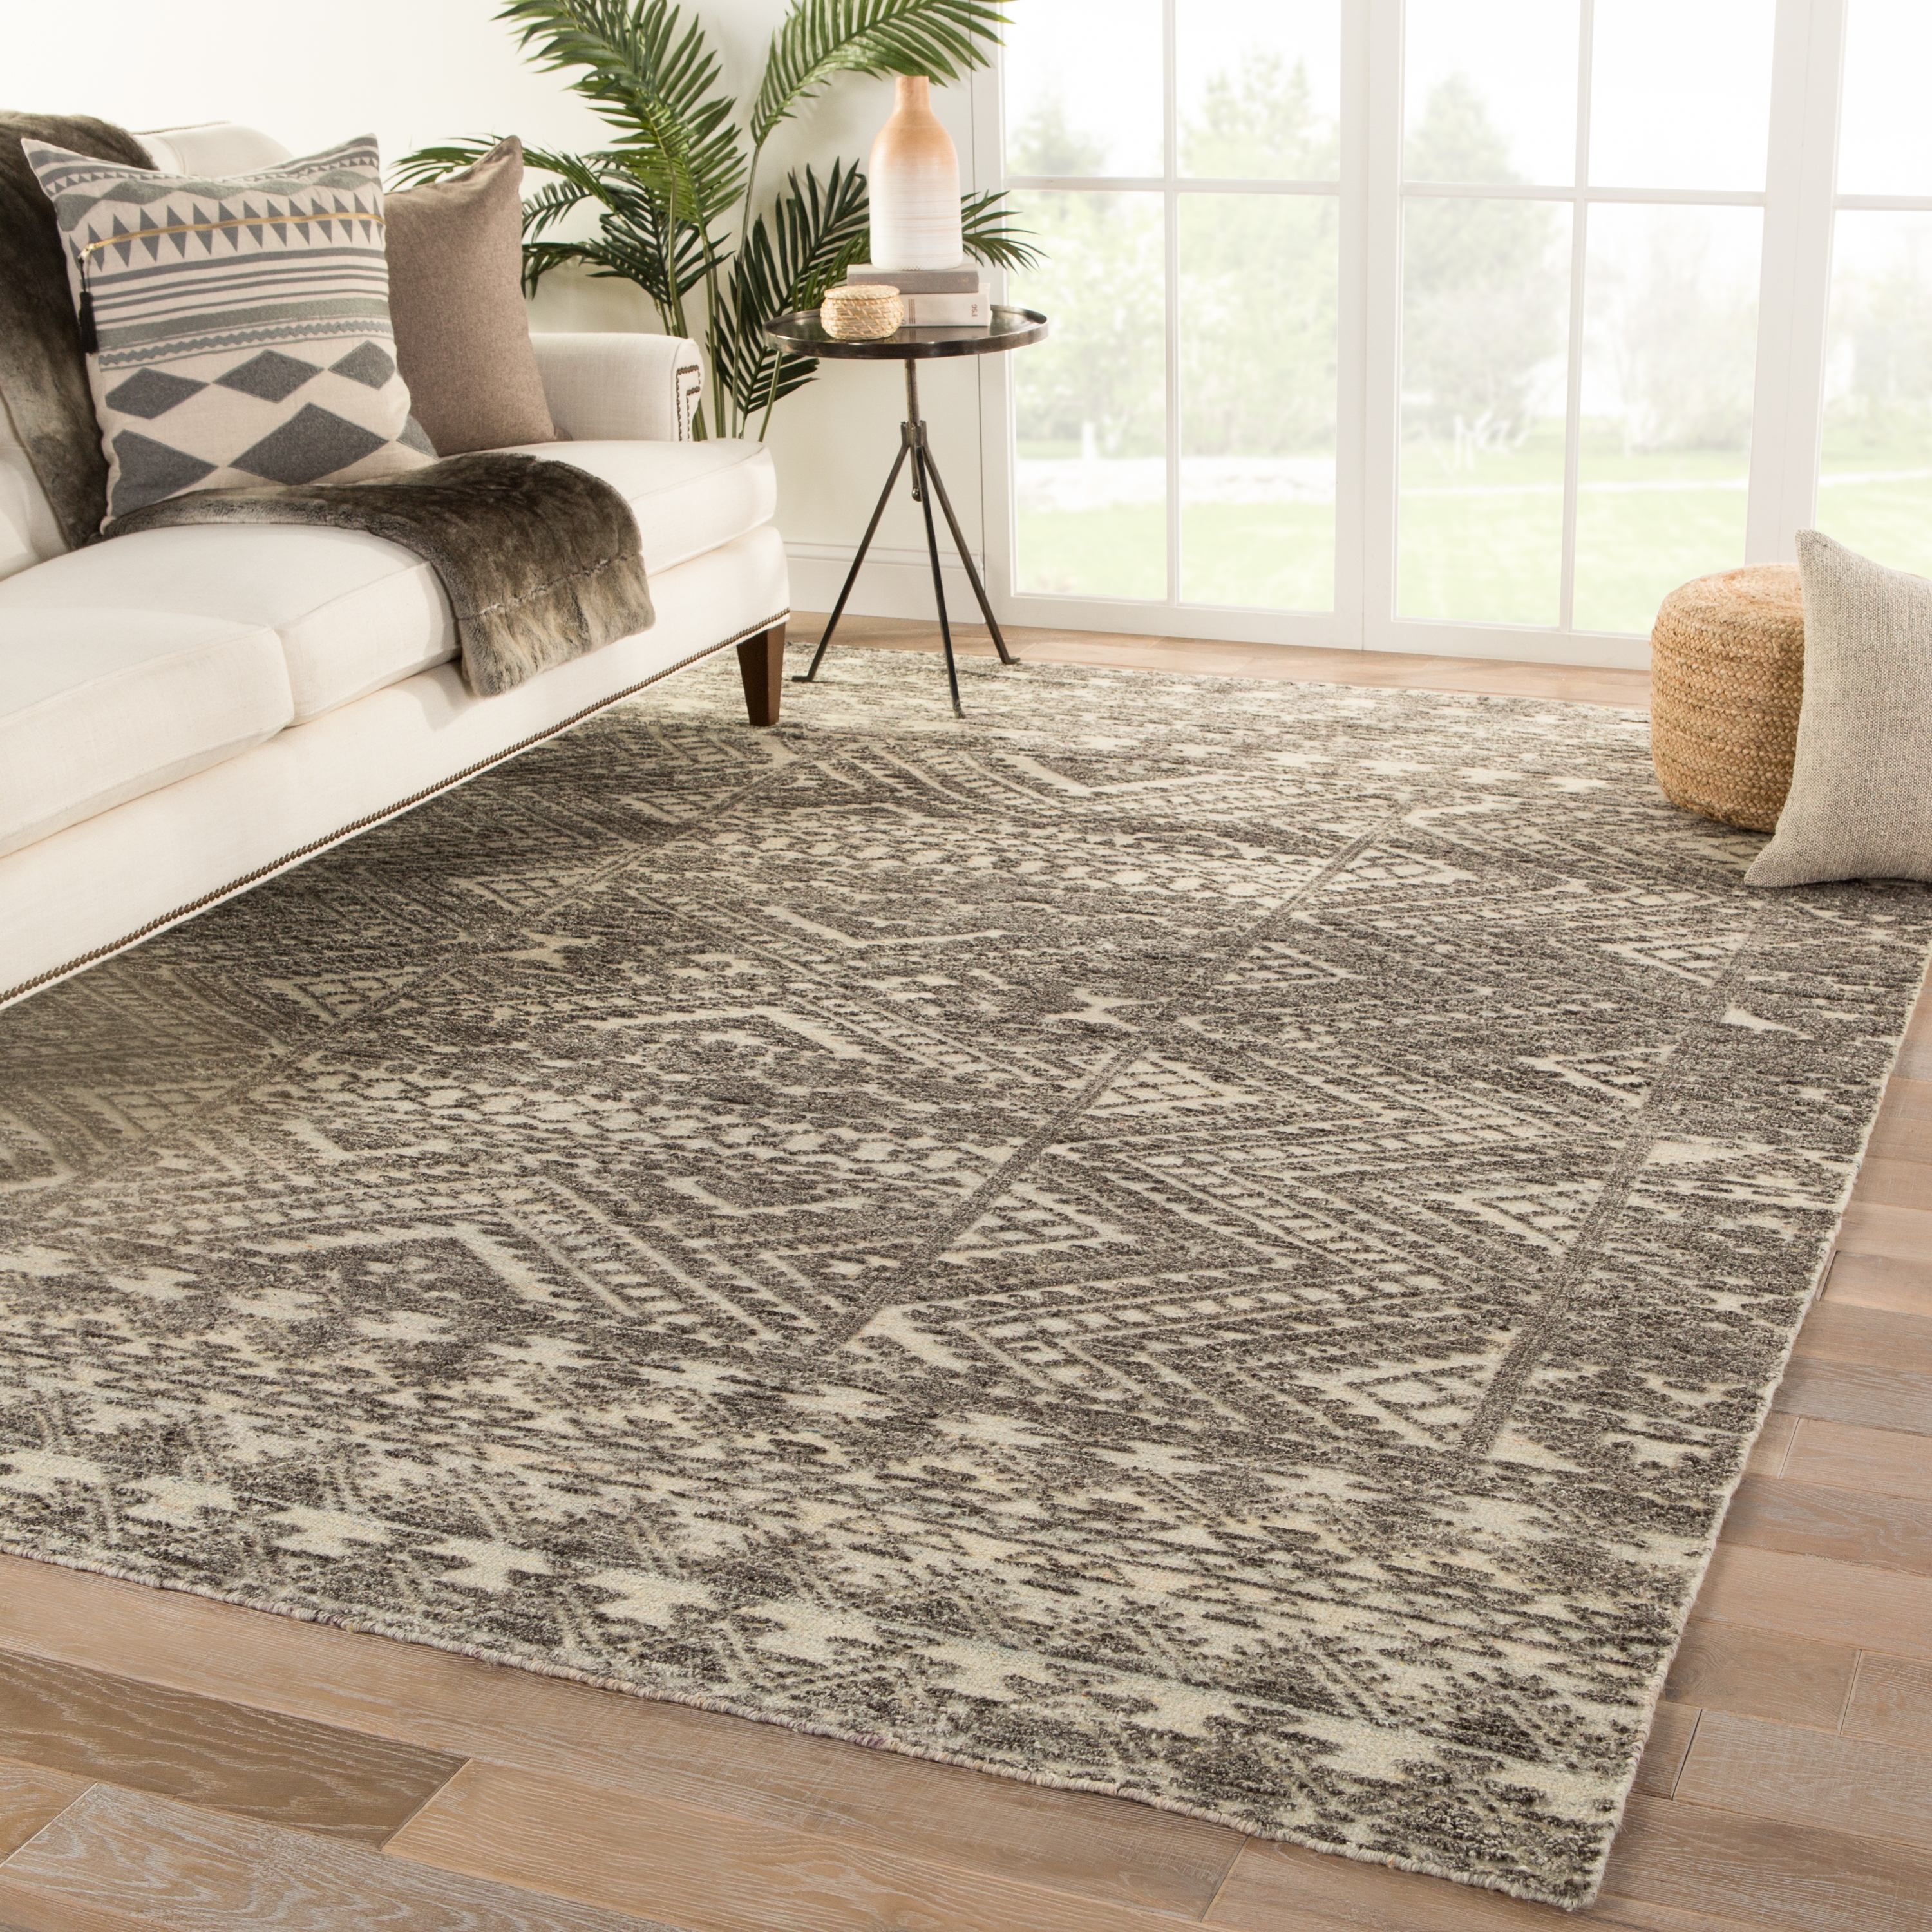 Prentice Hand-Knotted Geometric Dark Gray/ Taupe Area Rug (9'X13') - Image 4